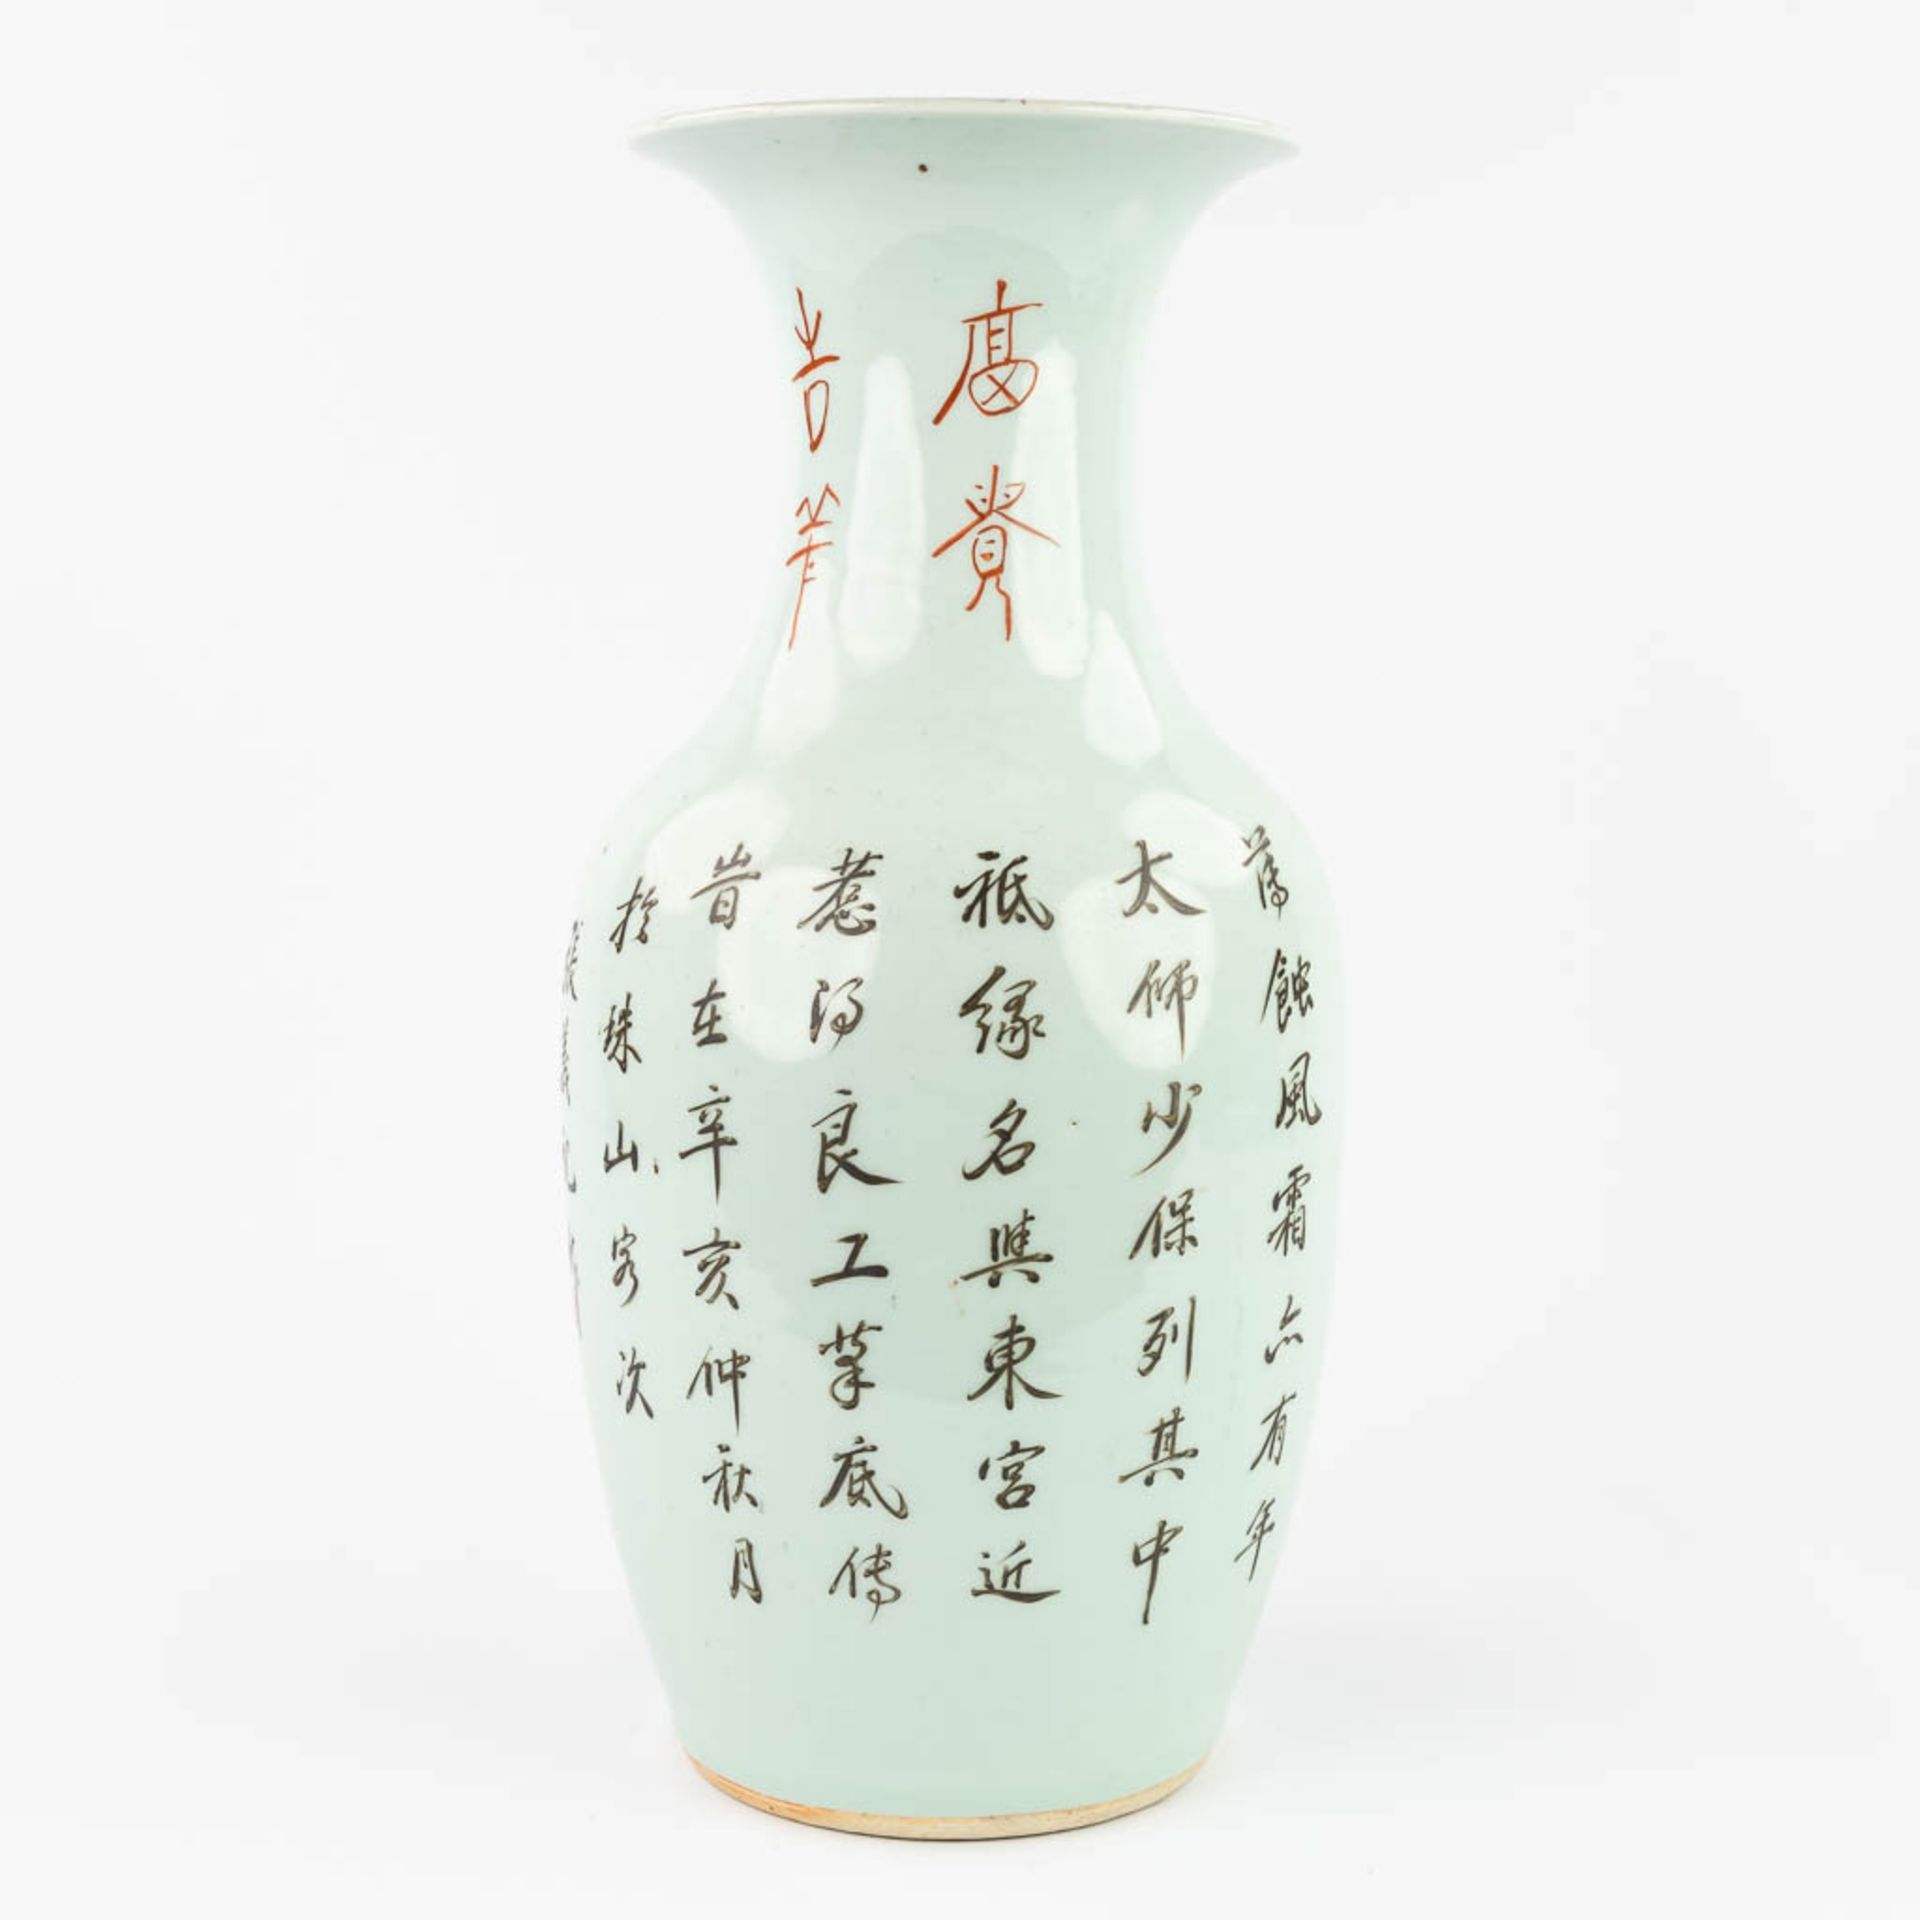 A Chinese vase made of porcelain and decorated with a red foo dog. (44,5 x 21 cm) - Image 3 of 16